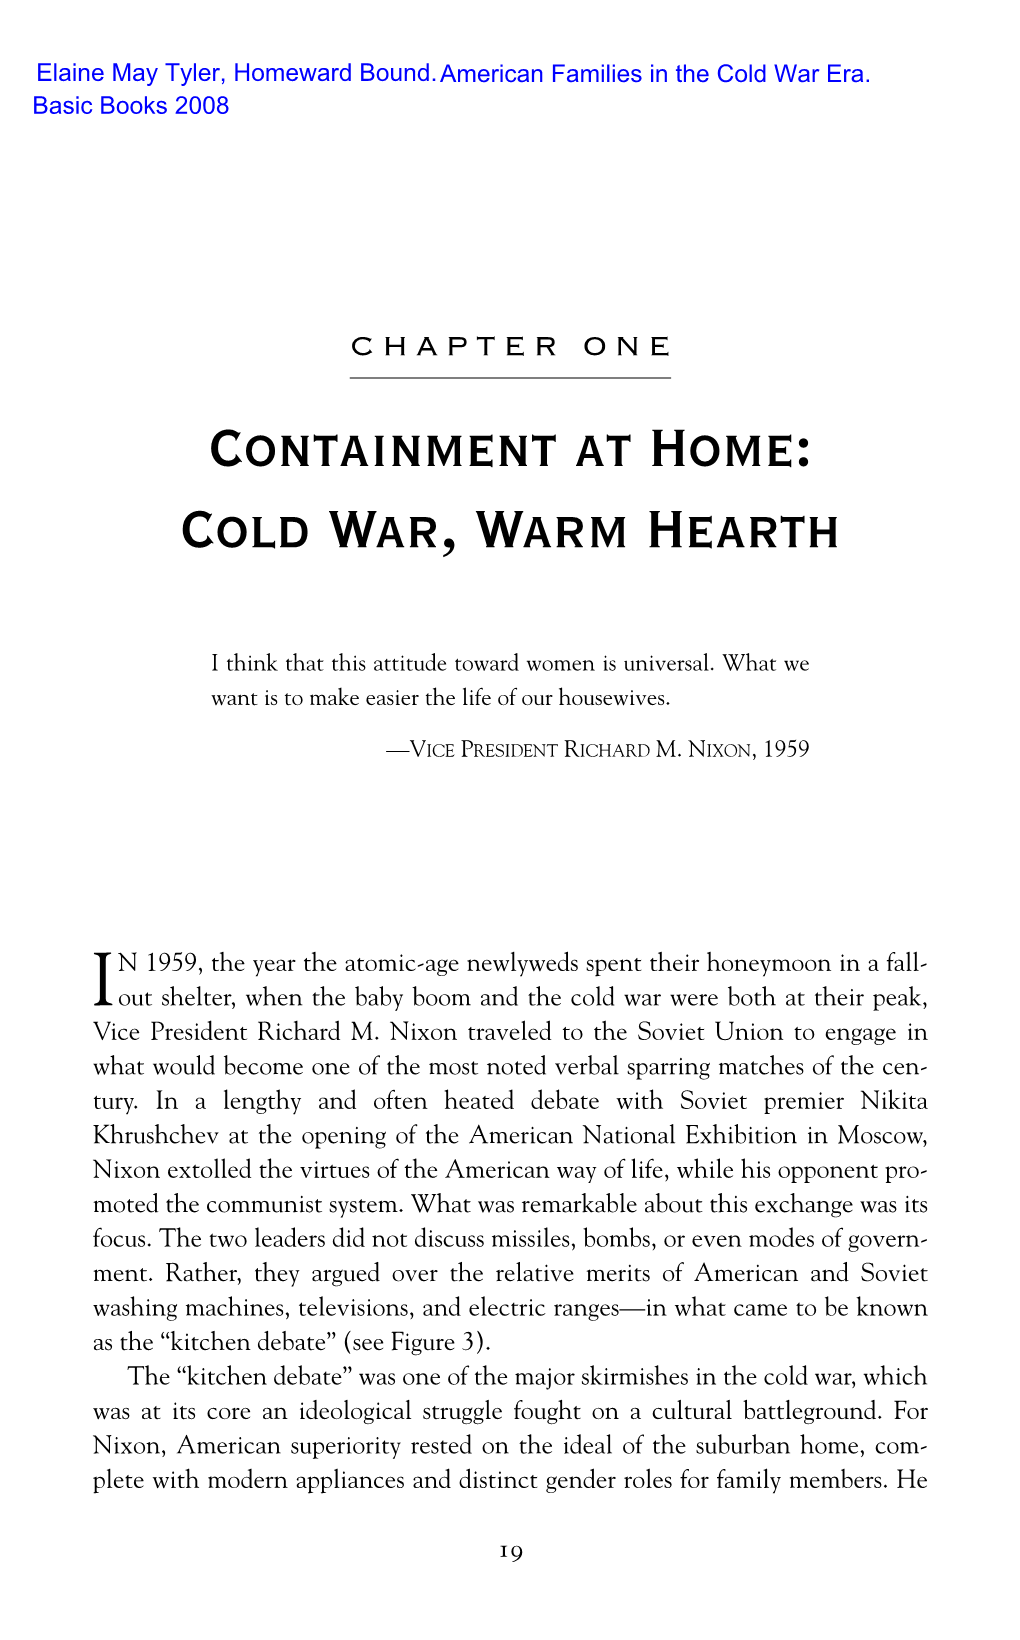 Containment at Home: Cold War, Warm Hearth